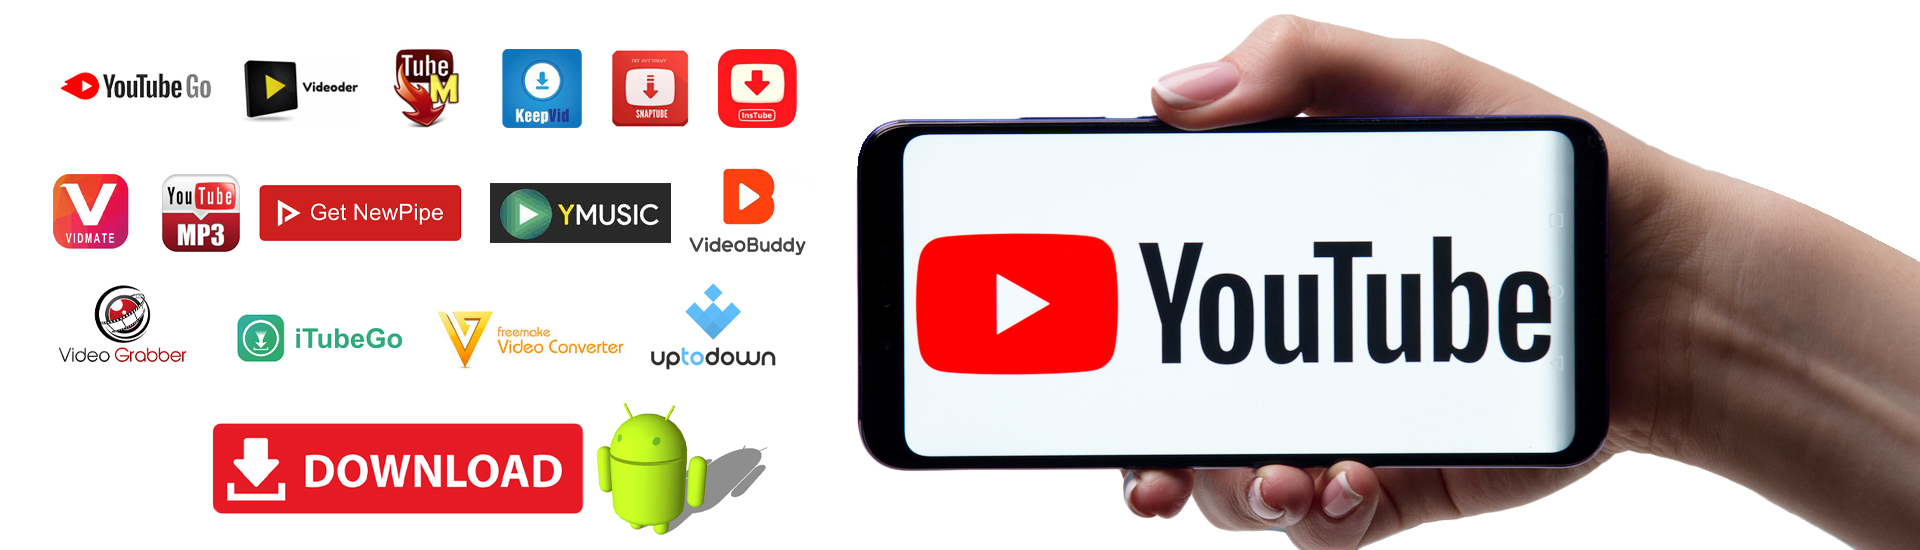 YouTube Video Downloader Apps for Android